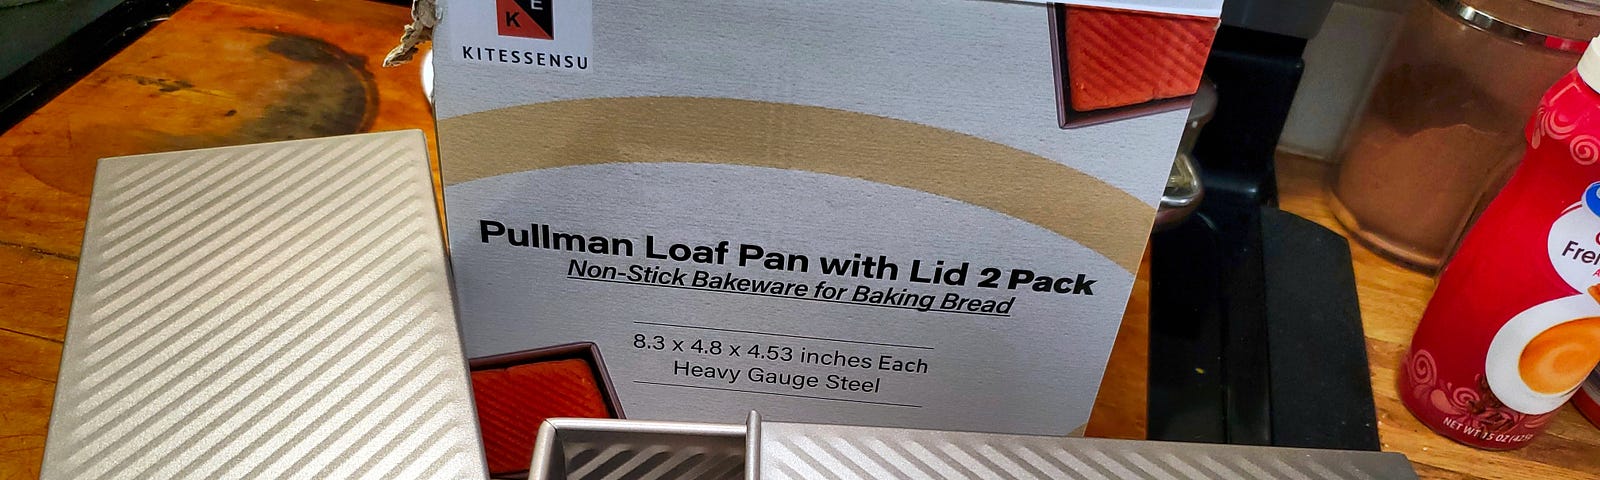 A pair of non-stick Pullman loaf pans with lids are displayed in front of their box, which claims the bakeware is ideal for baking bread. The pans appear to be new and are placed on a kitchen counter, next to a jar and a bottle.